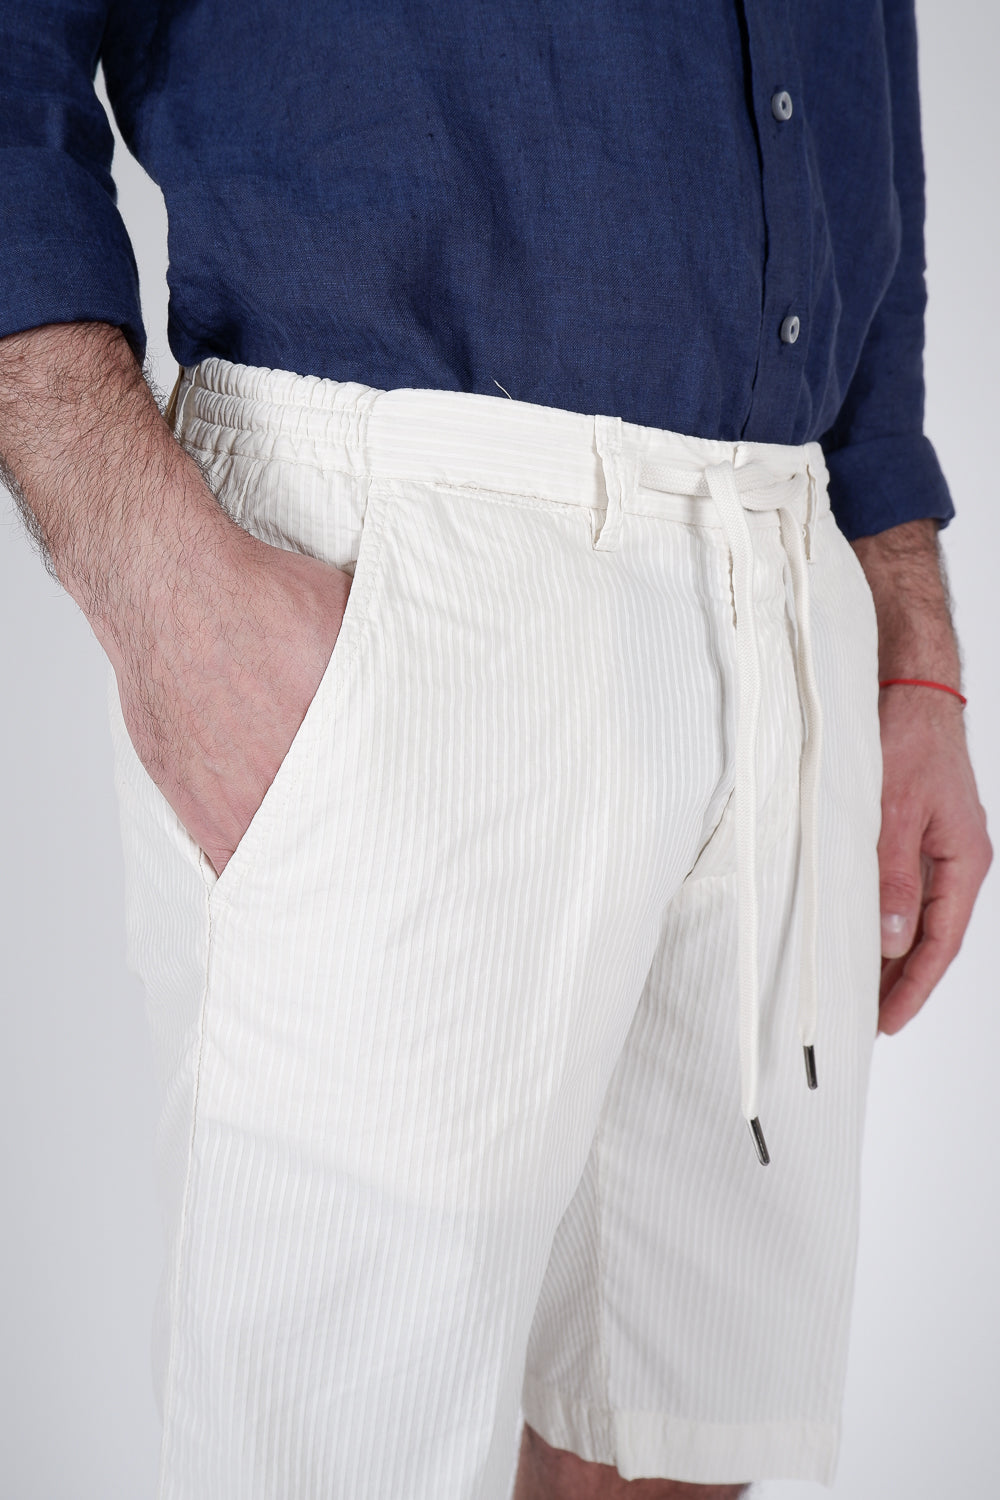 Buy the Briglia Italian Stripe Chino Shorts in White at Intro. Spend £100 for free UK delivery. Official stockists. We ship worldwide.